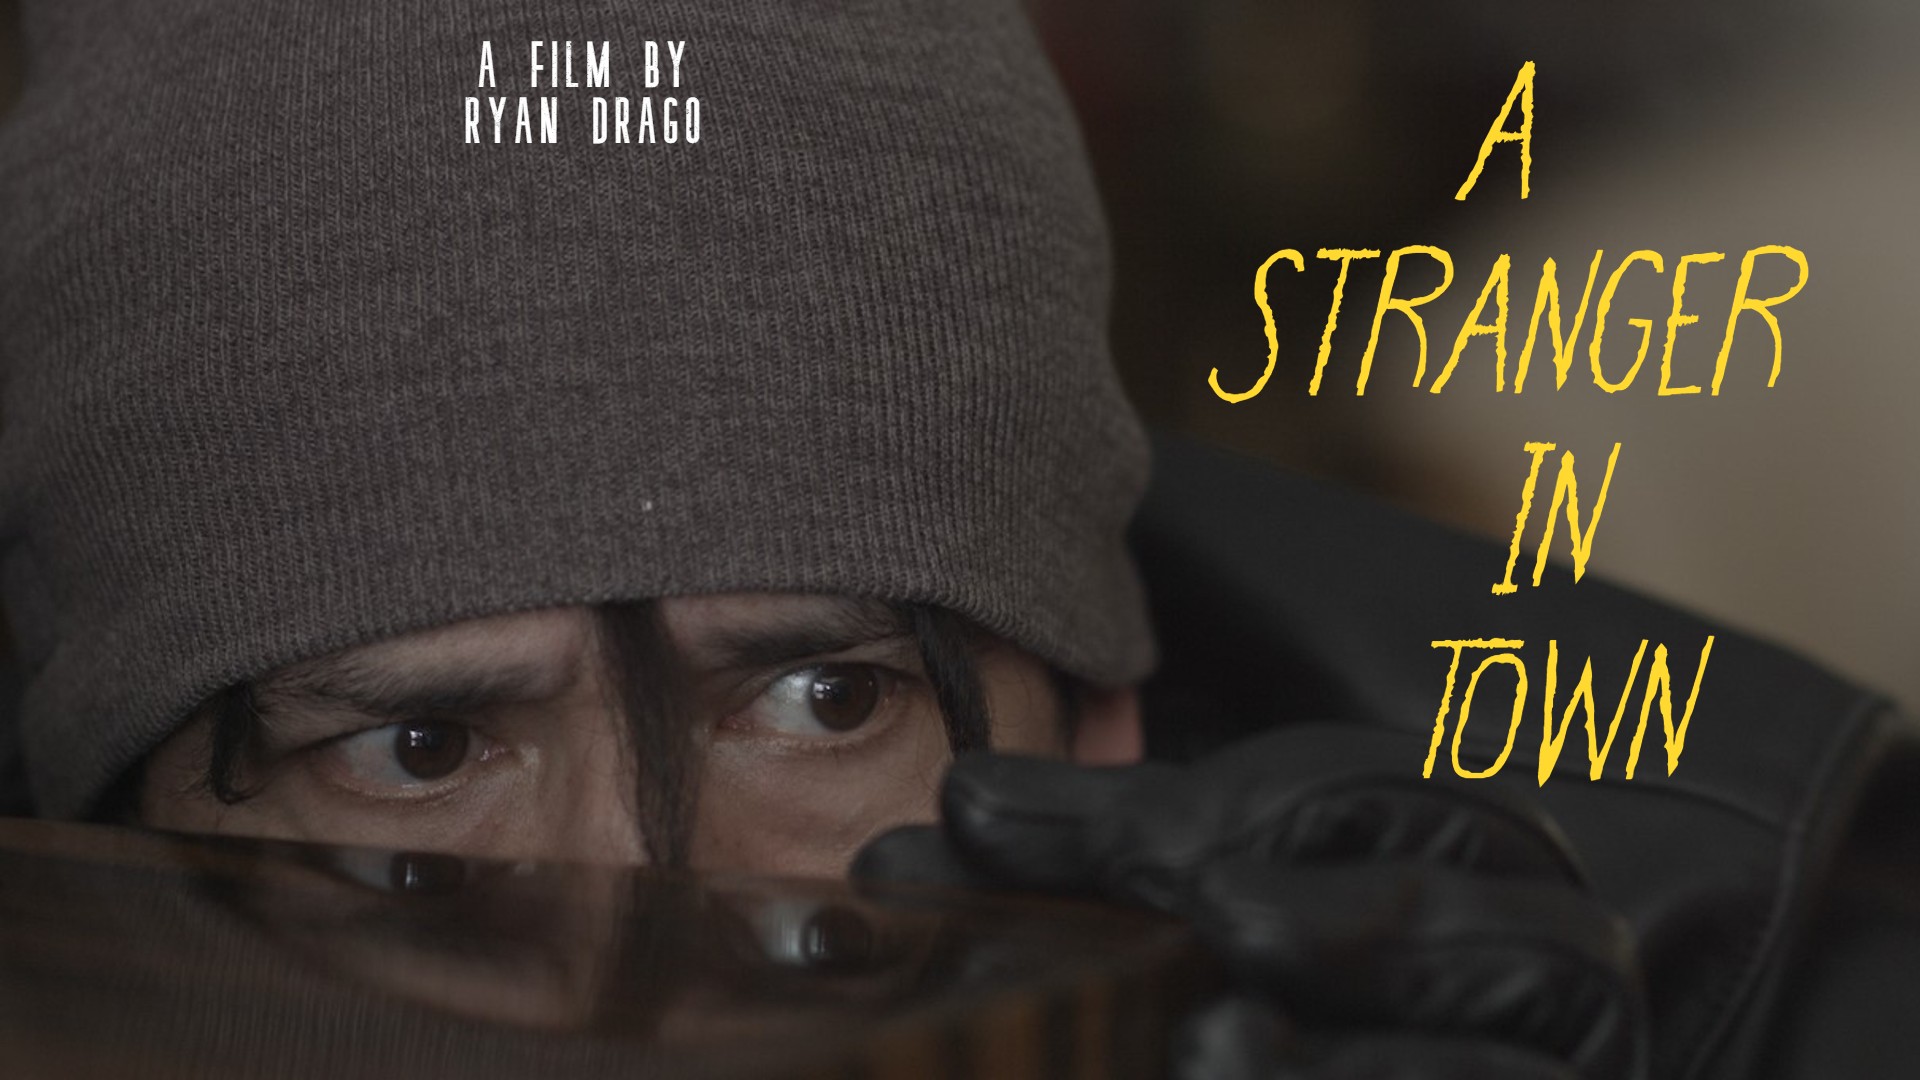 A Stranger In Town – Filming continues.